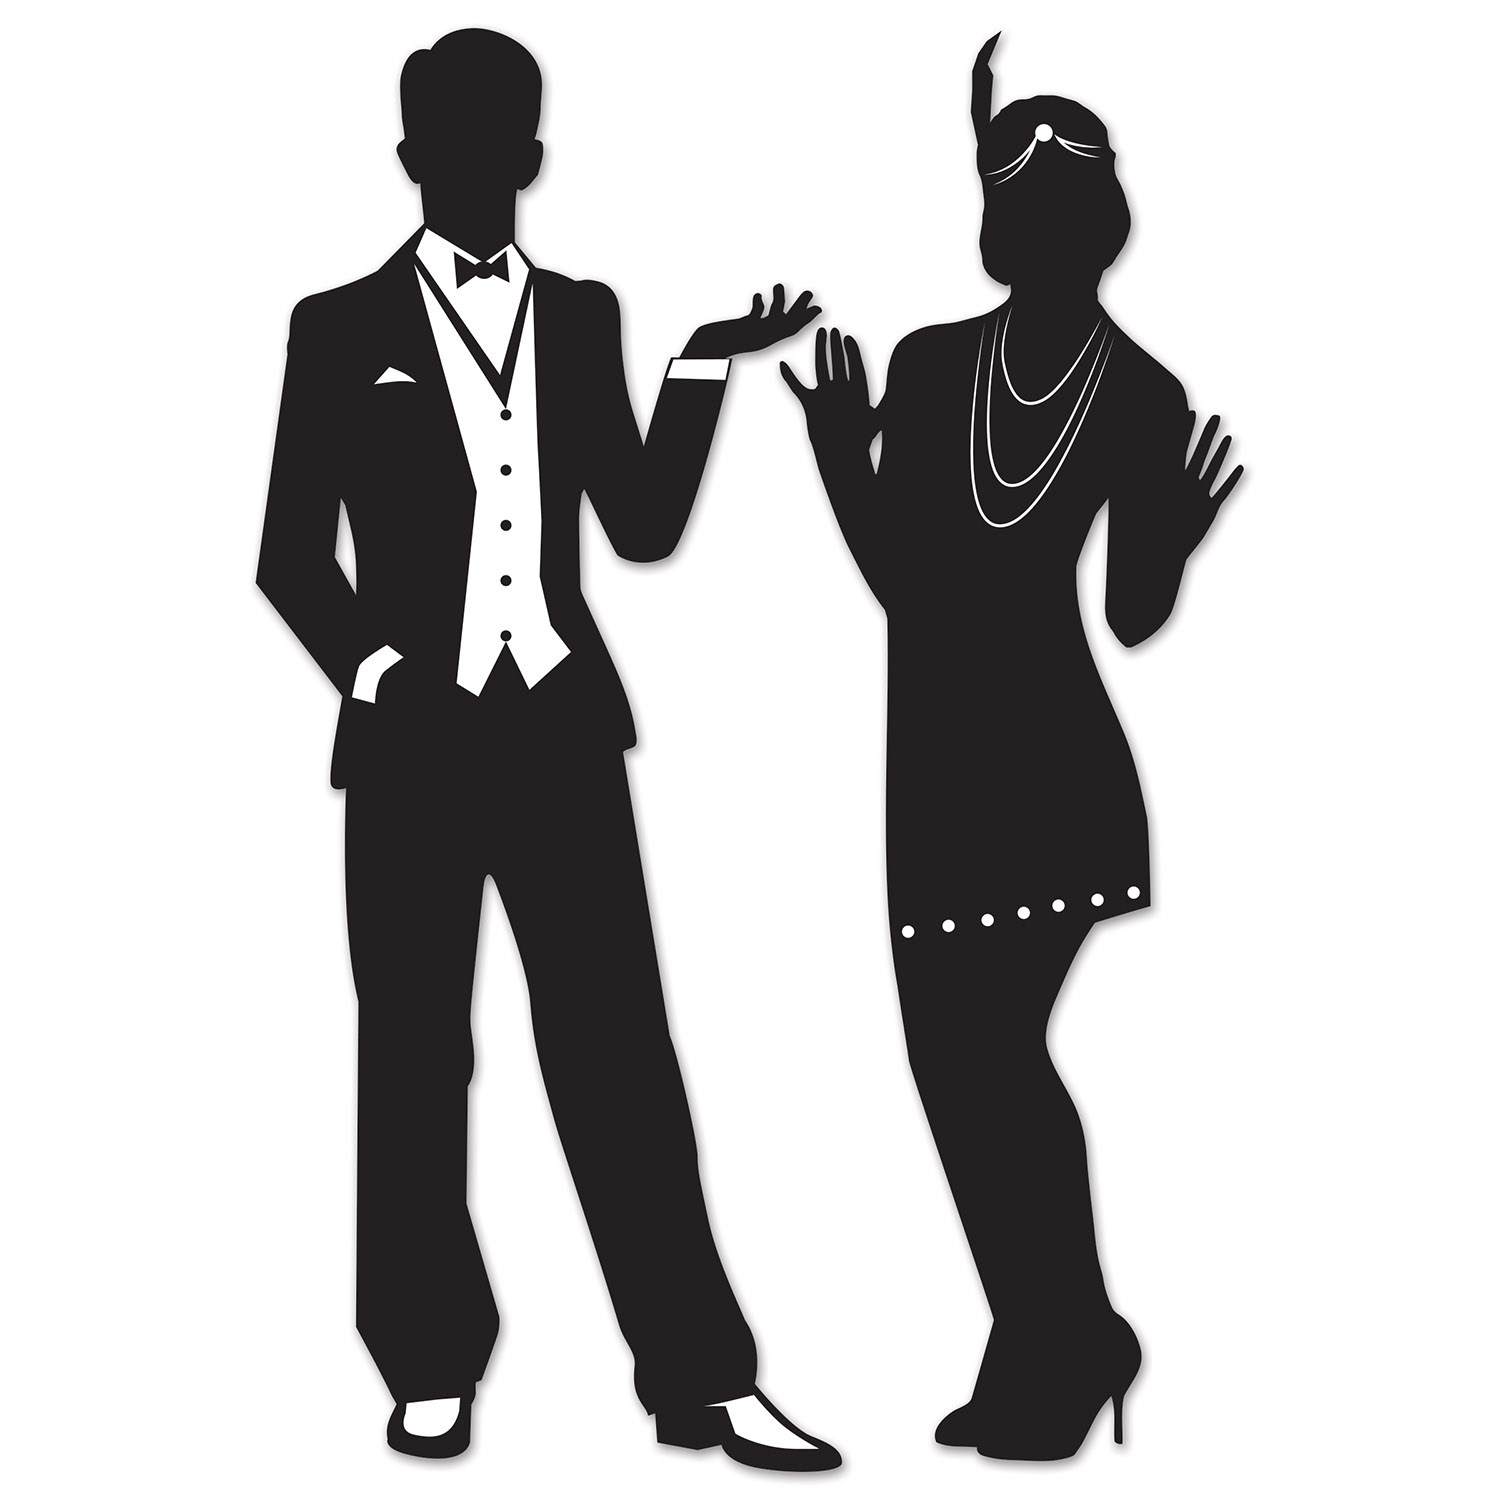 Black 20s silhouette of a male and female dressed up for a party.